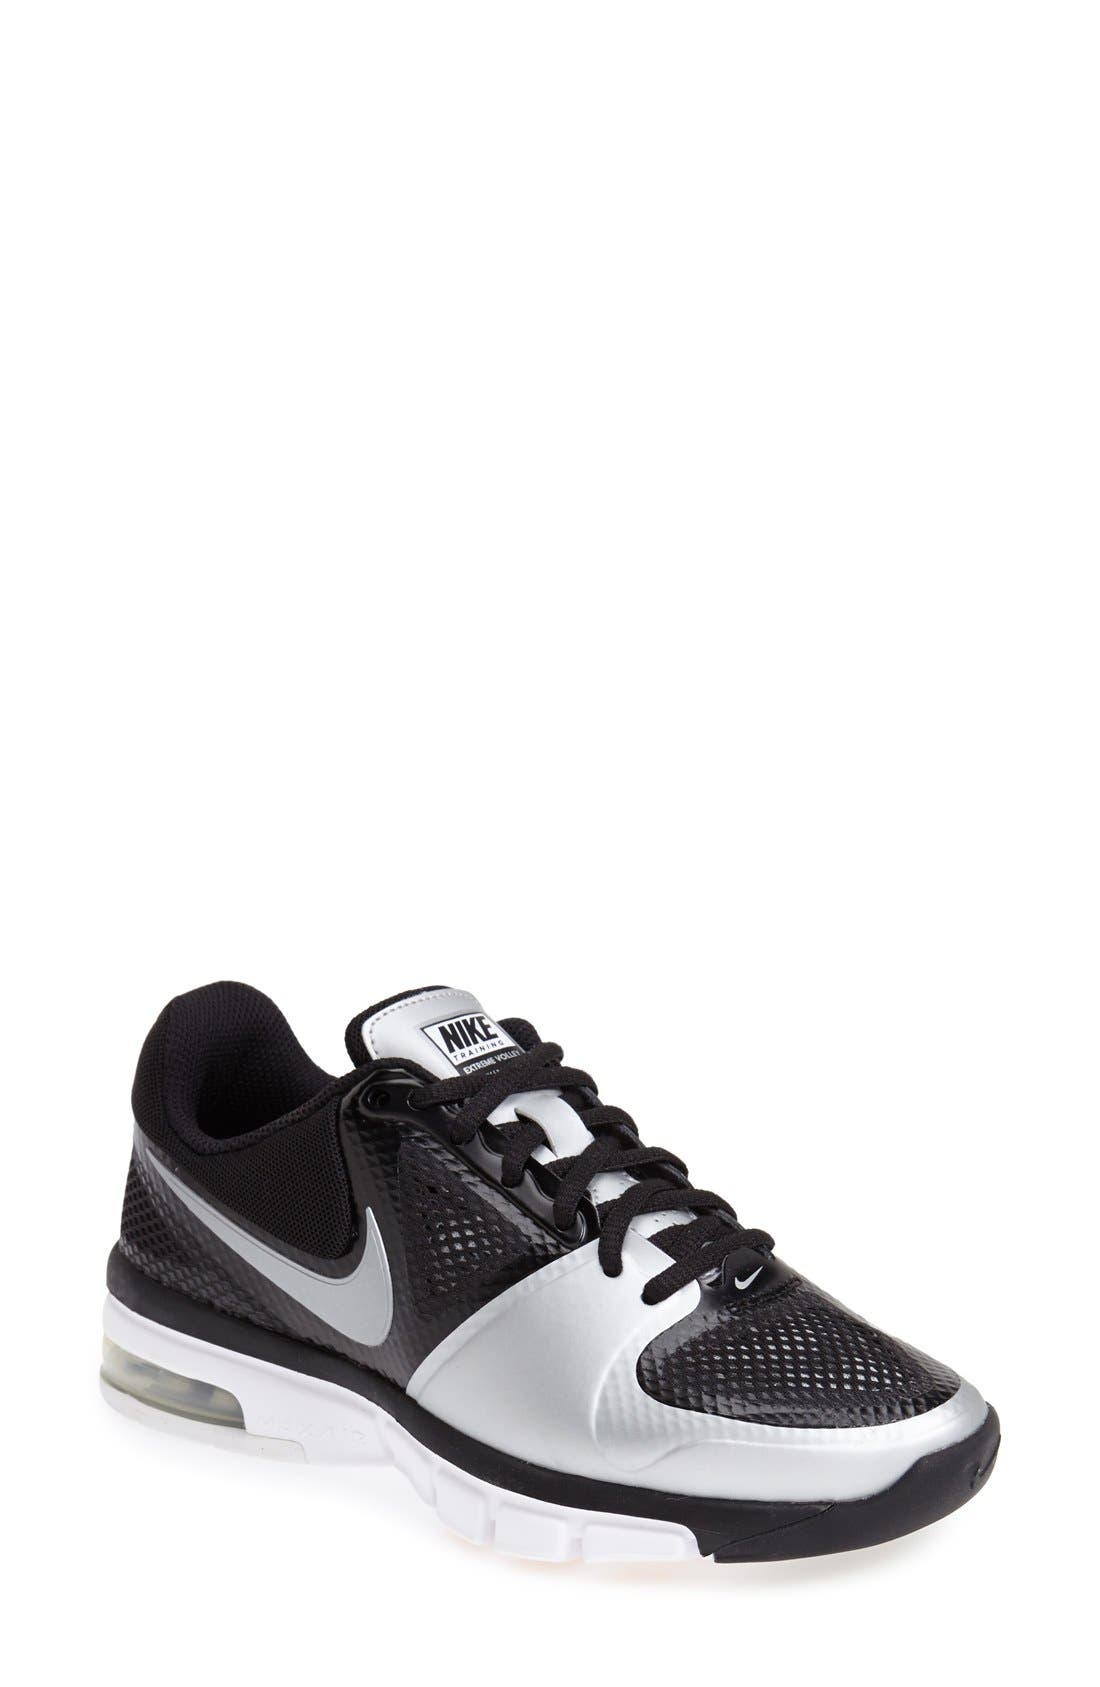 nike air extreme volleyball shoes